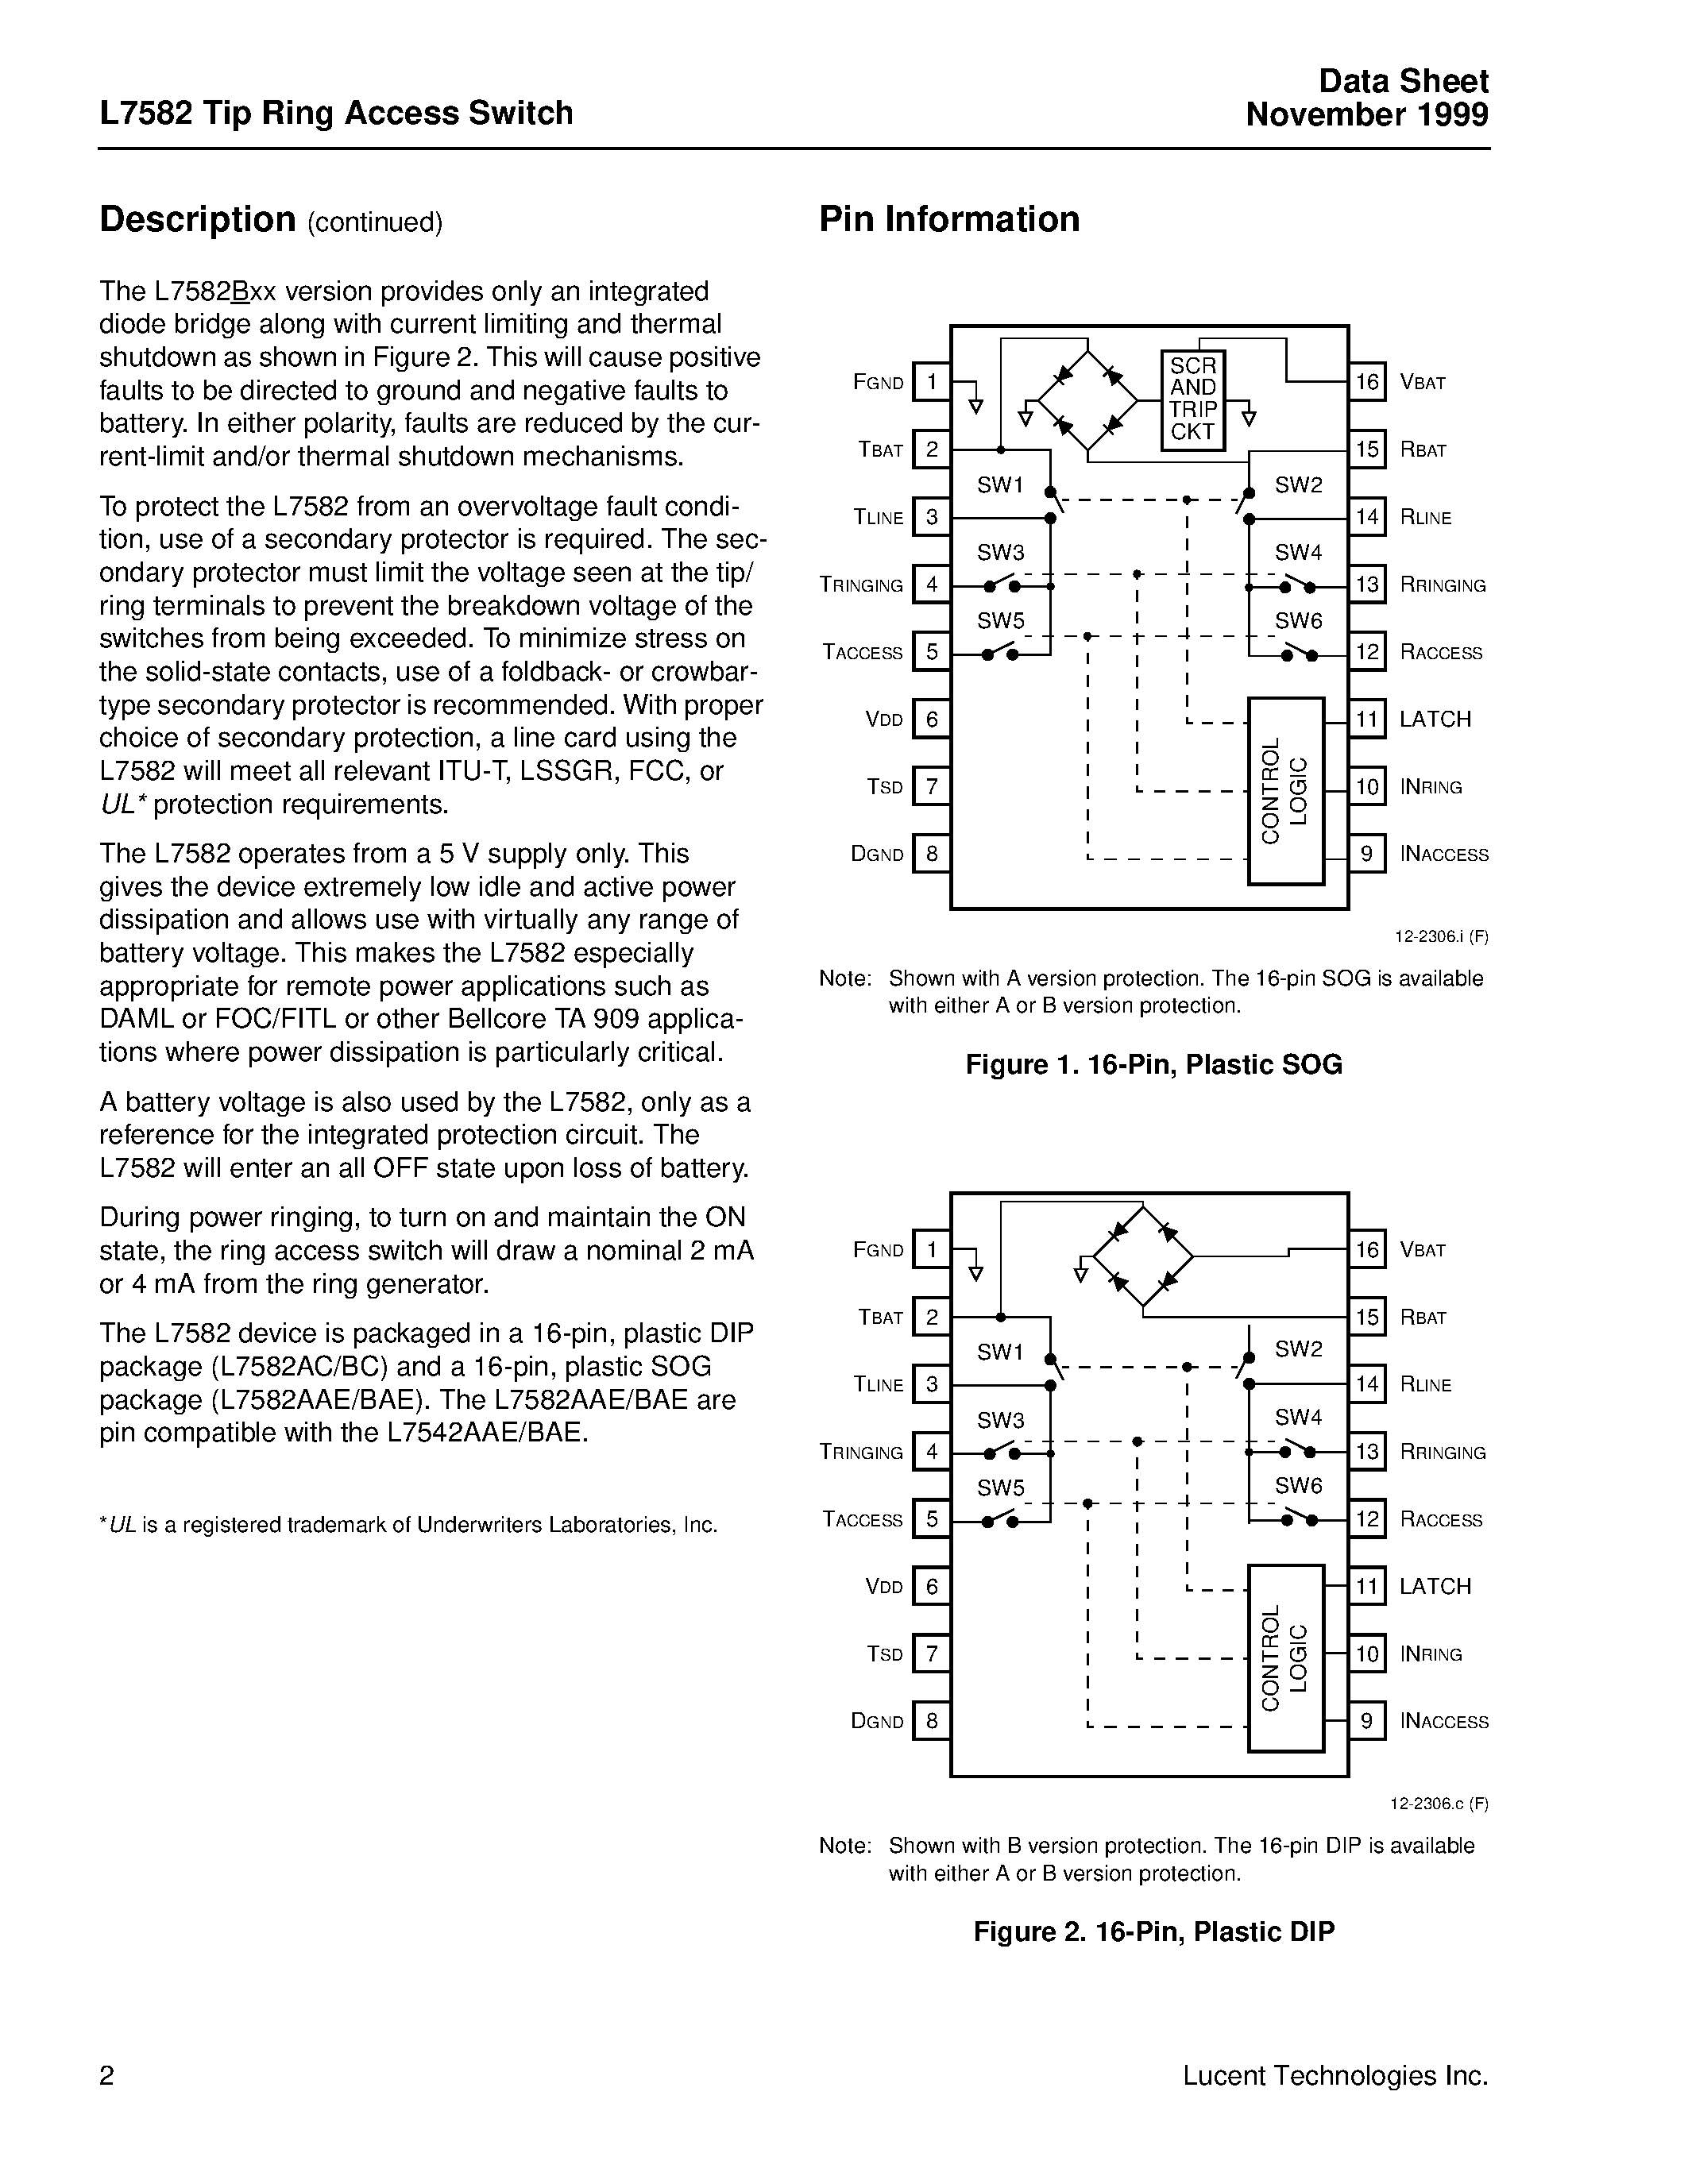 Datasheet ATTL7582AC - Tip Ring Access Switch page 2